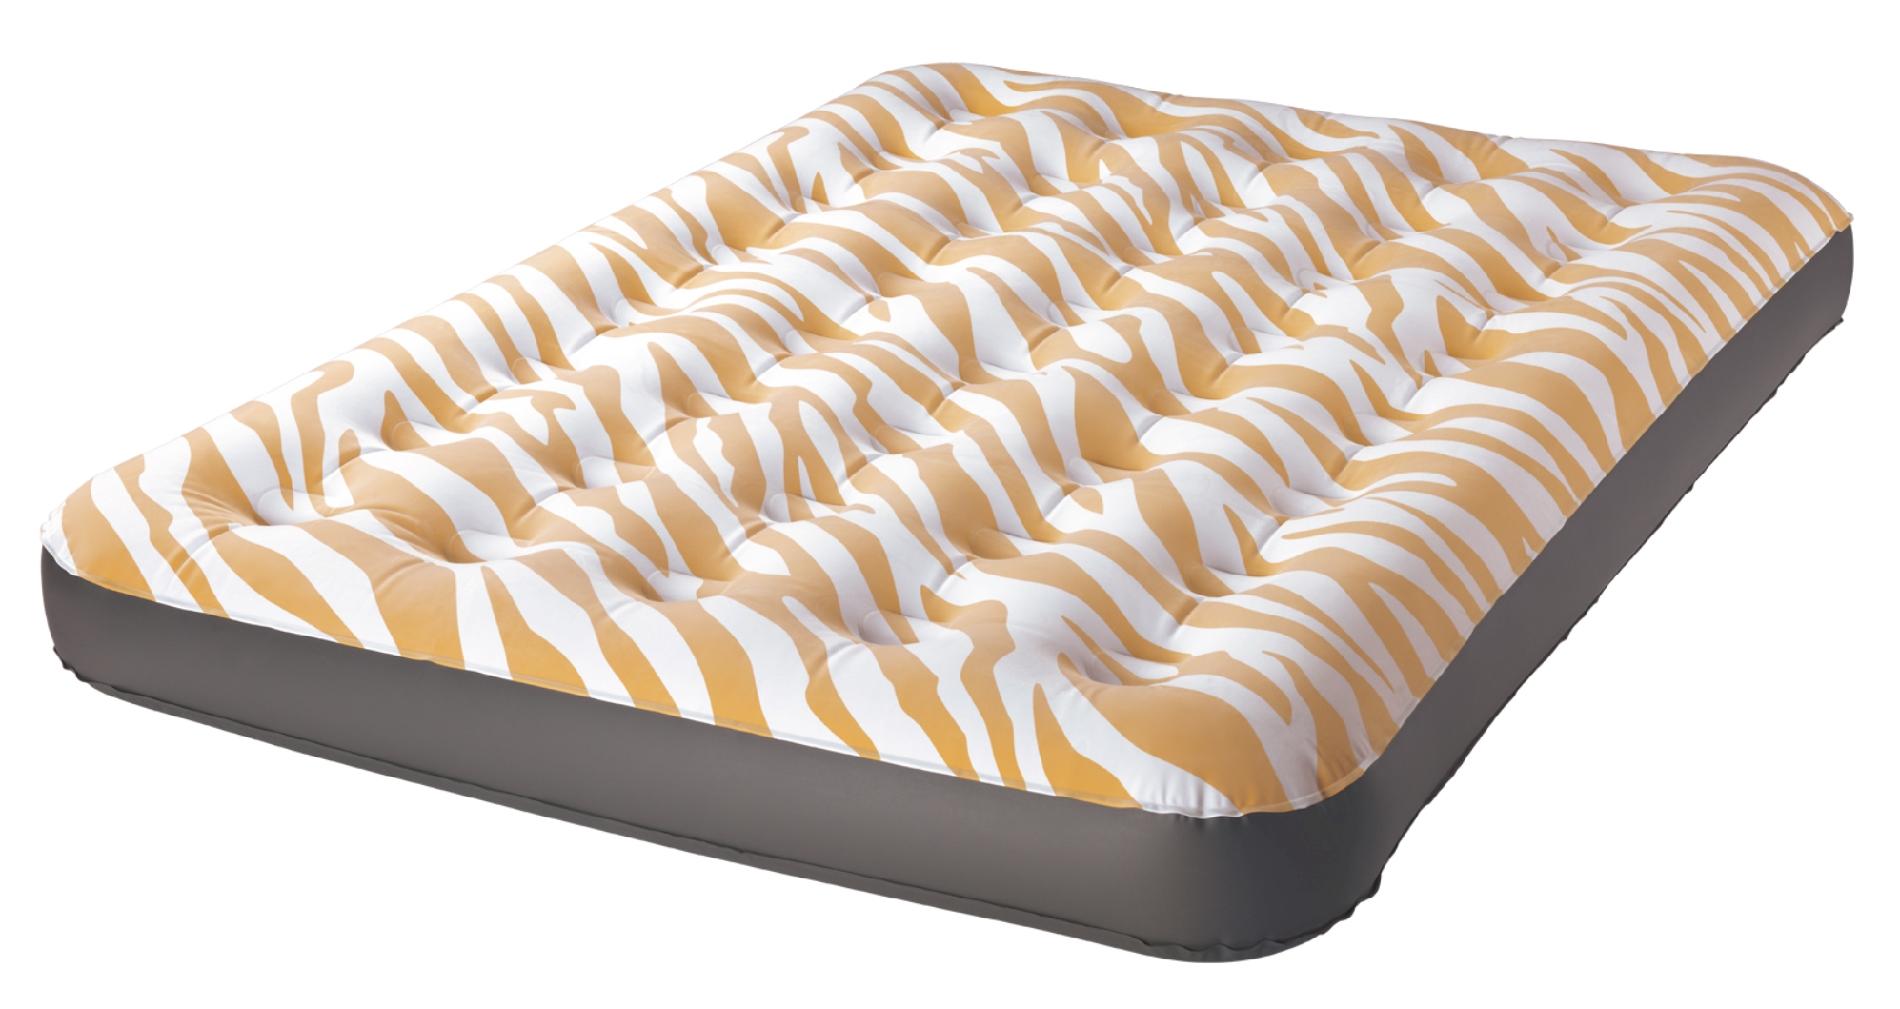 Northwest Territory Full Air Mattress Only $19.99 | Great for Company!